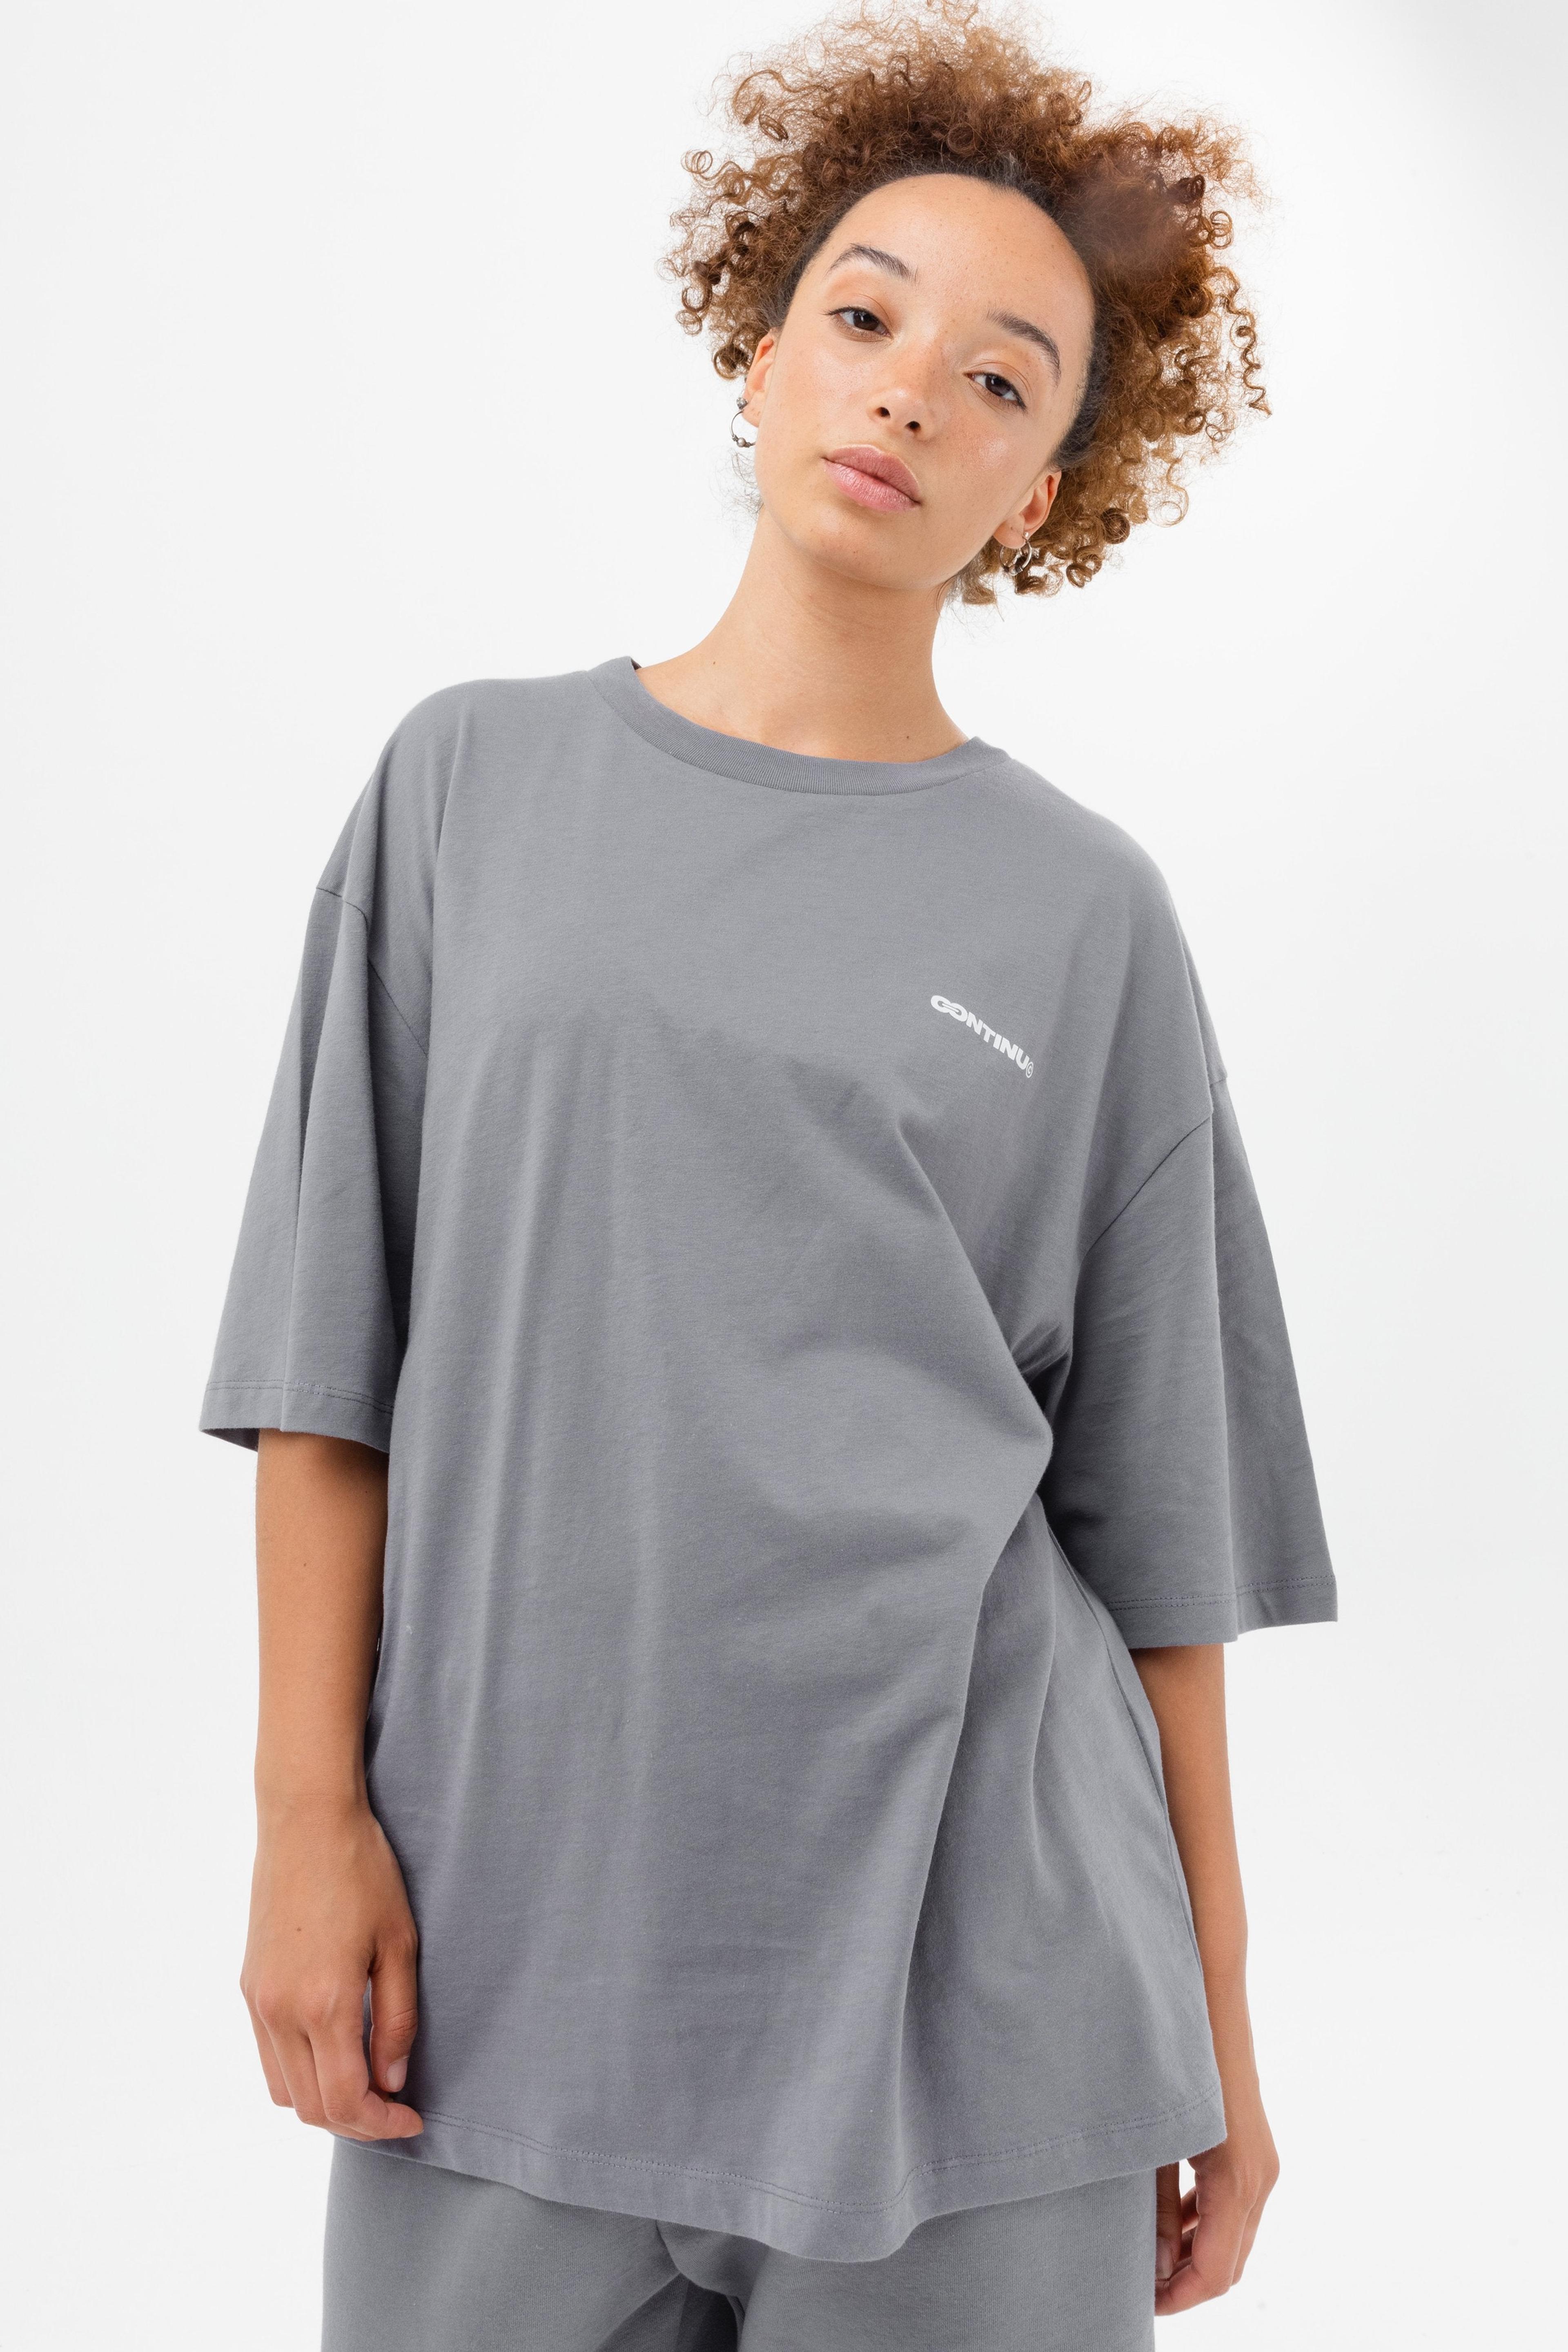 Alternate View 2 of CONTINU8 CHARCOAL OVERSIZED T-SHIRT